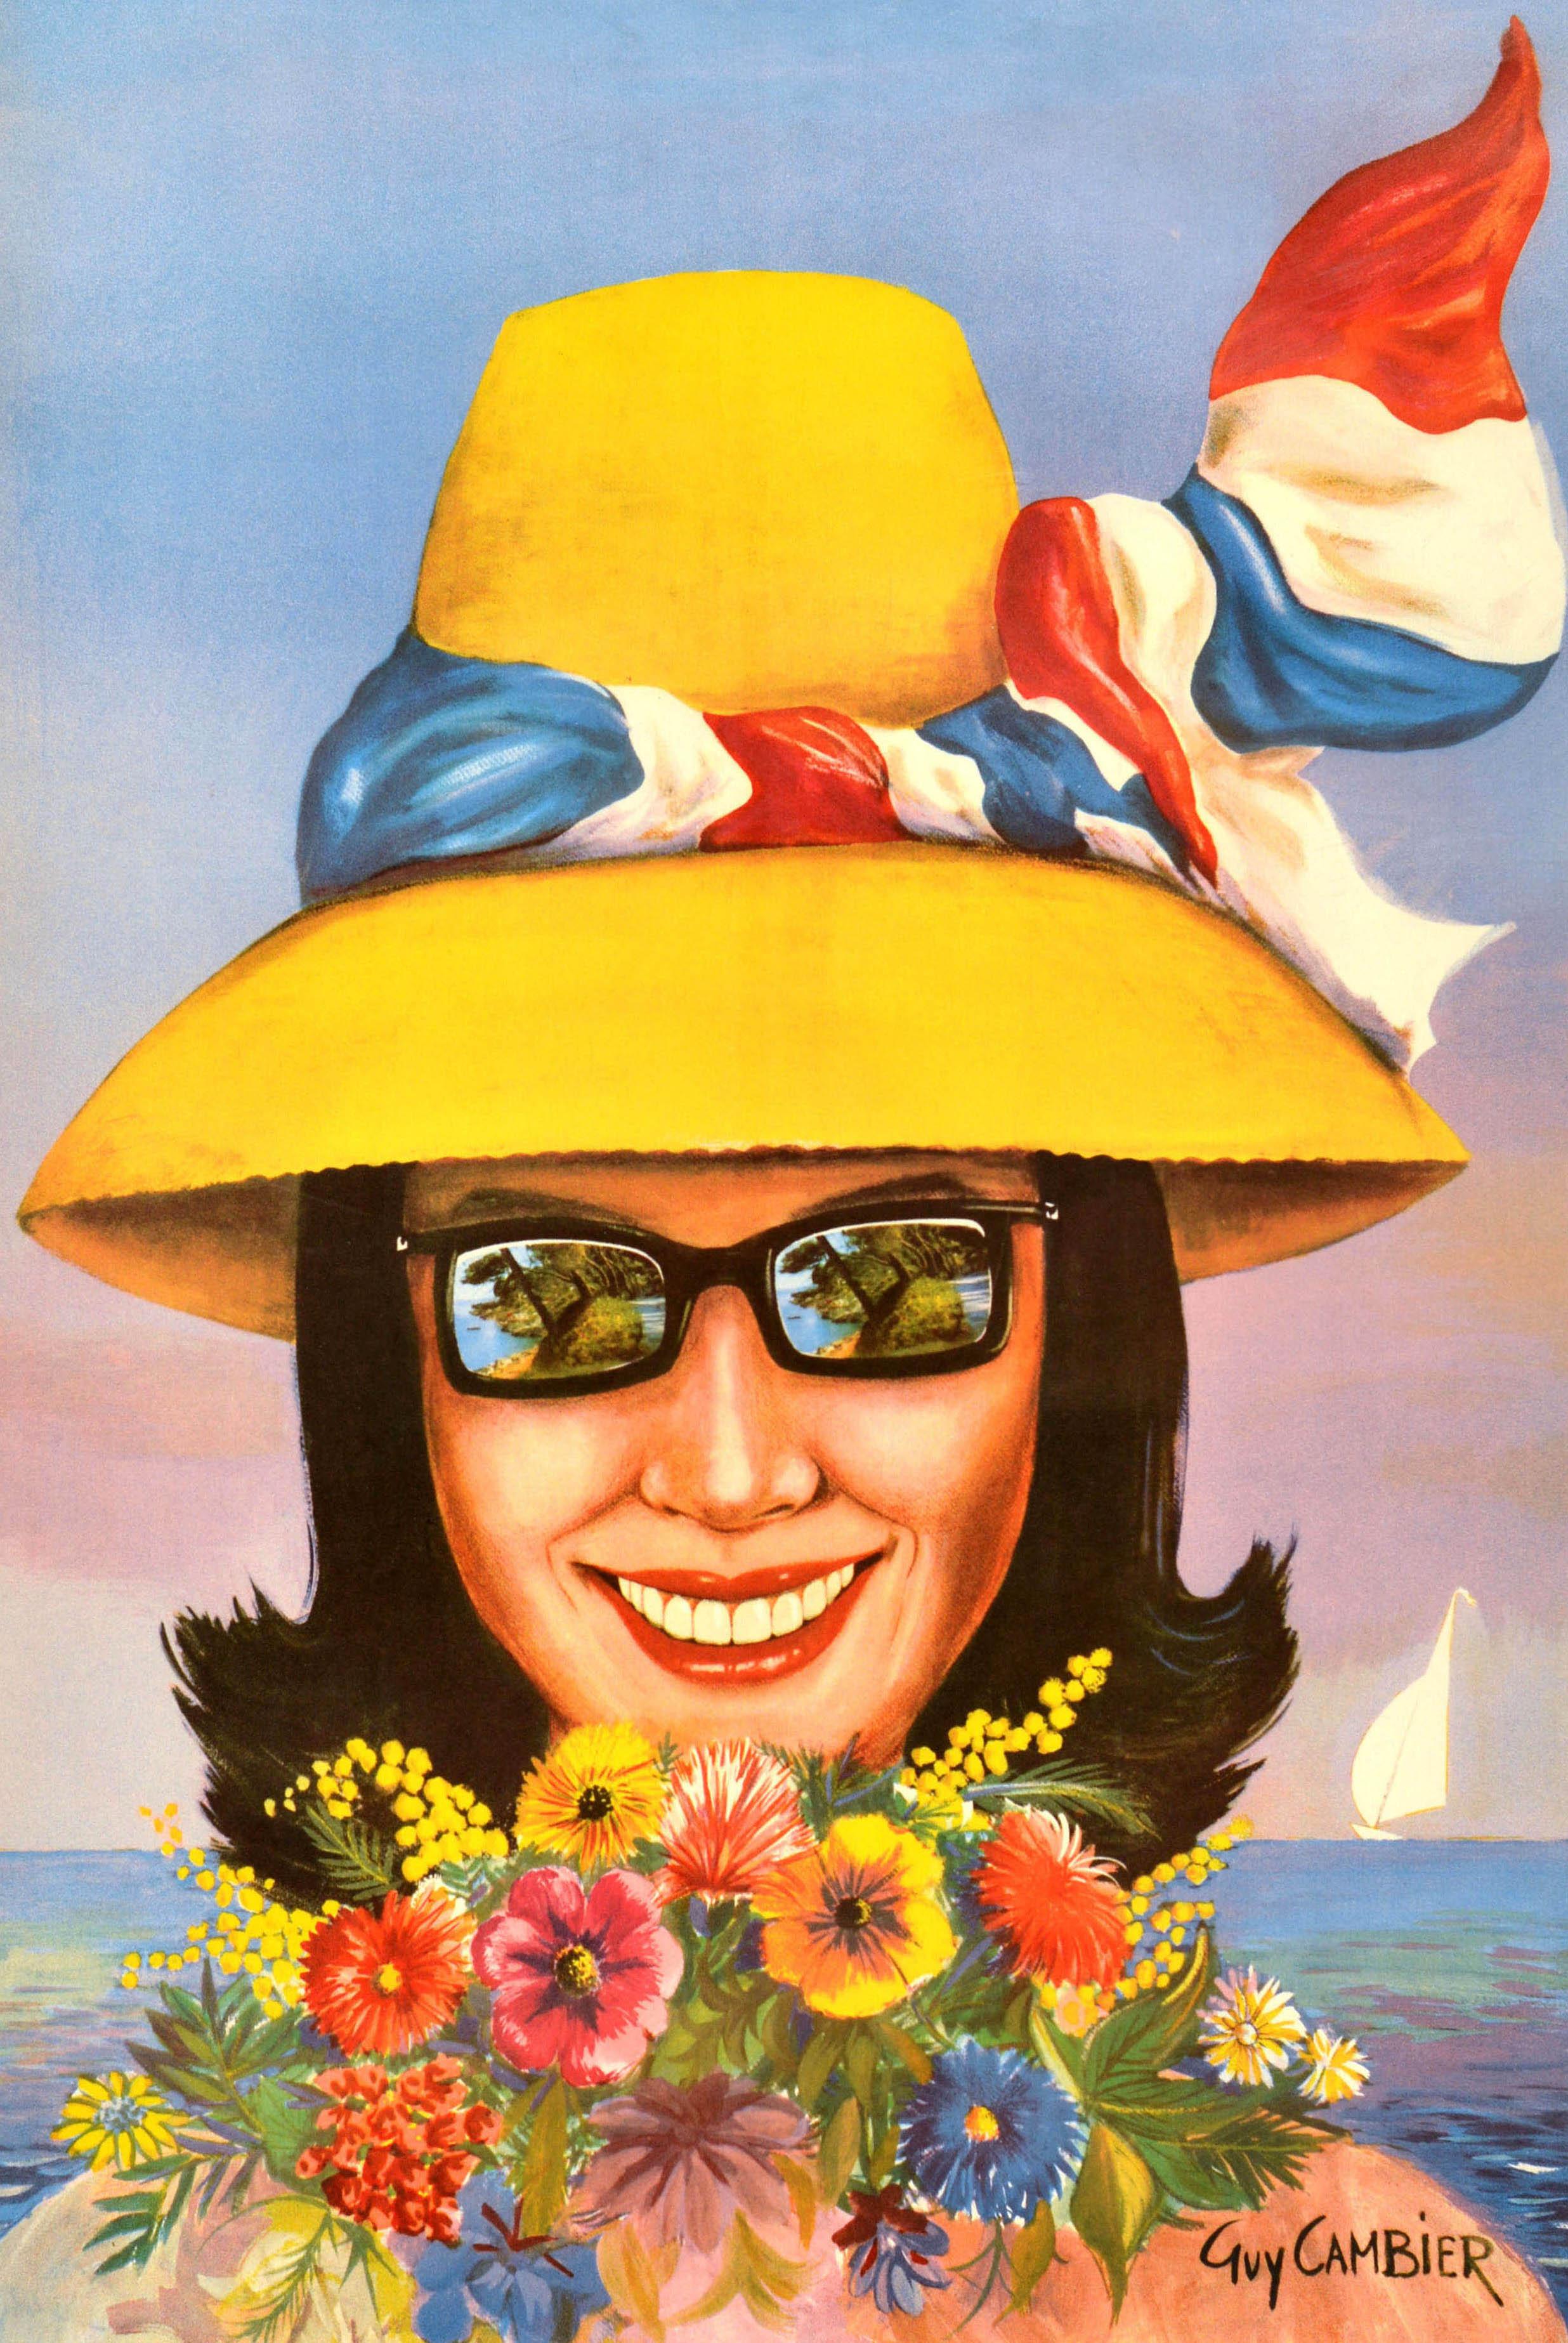 Original vintage travel poster for Roquebrune Cap Martin Riviera Cote d'Azur France featuring a colourful illustration of a smiling lady in a summer hat with a red, white and blue for the French flag tied around it, and reflective sunglasses holding